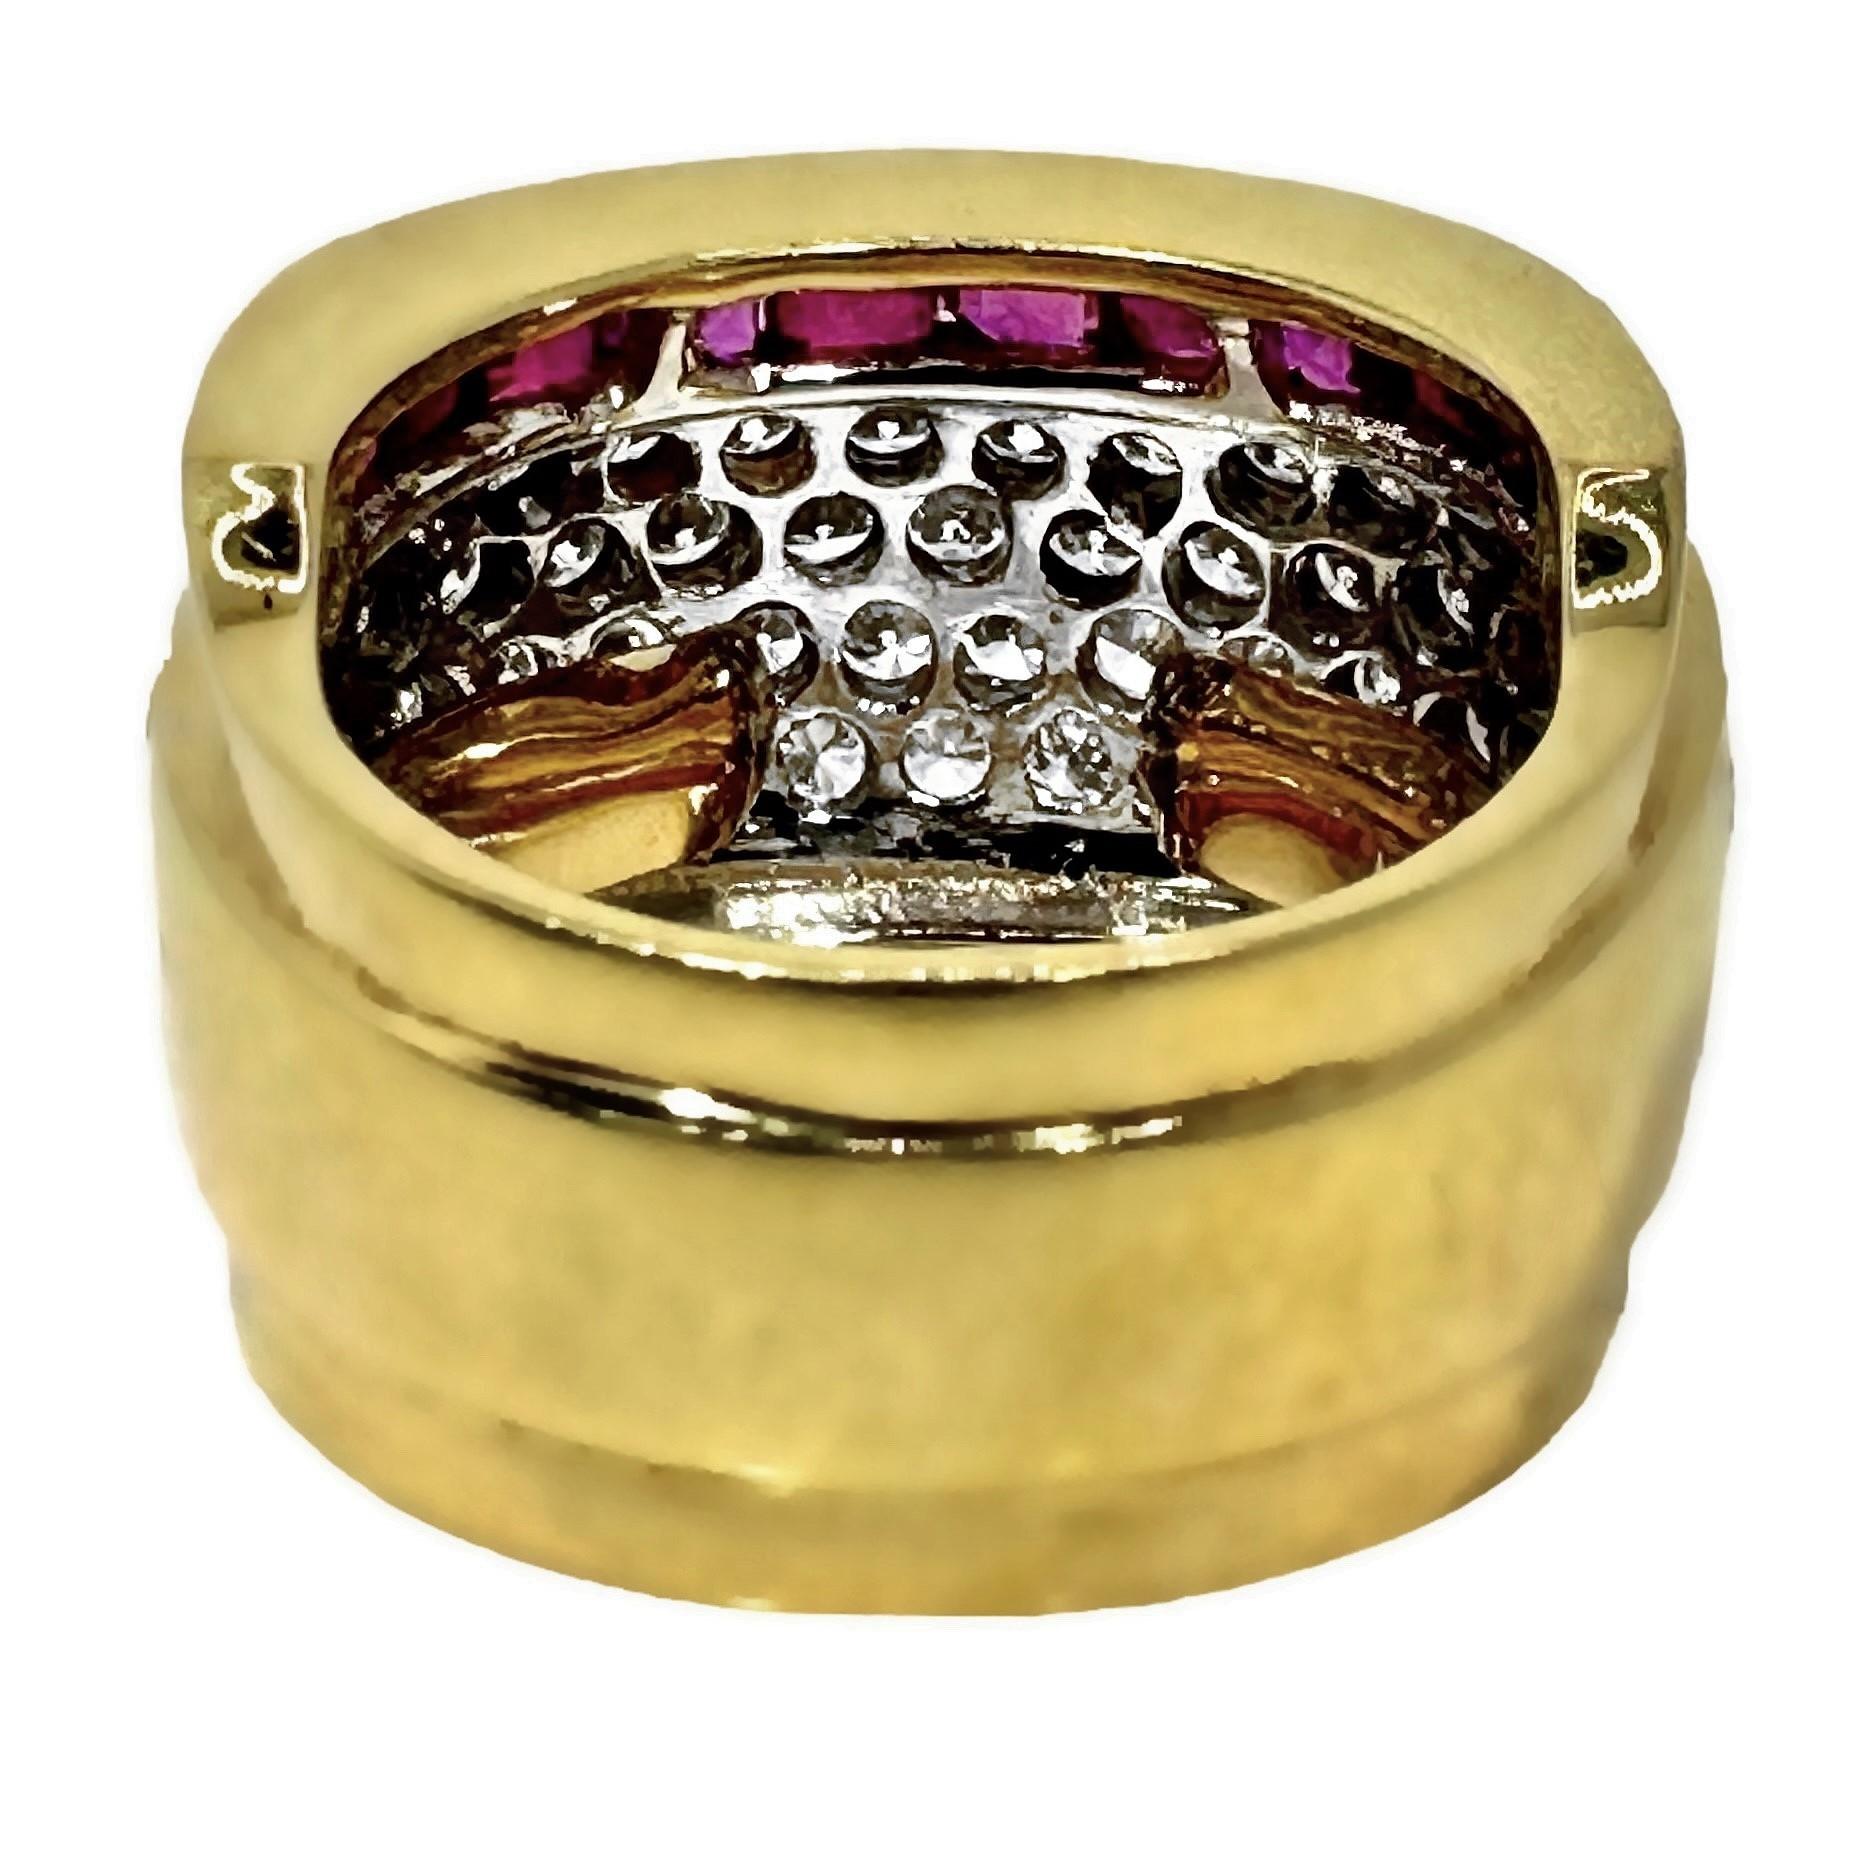 Wide and Tailored 18k Gold Band Ring with Diamonds and Vivid Rubies In Good Condition For Sale In Palm Beach, FL